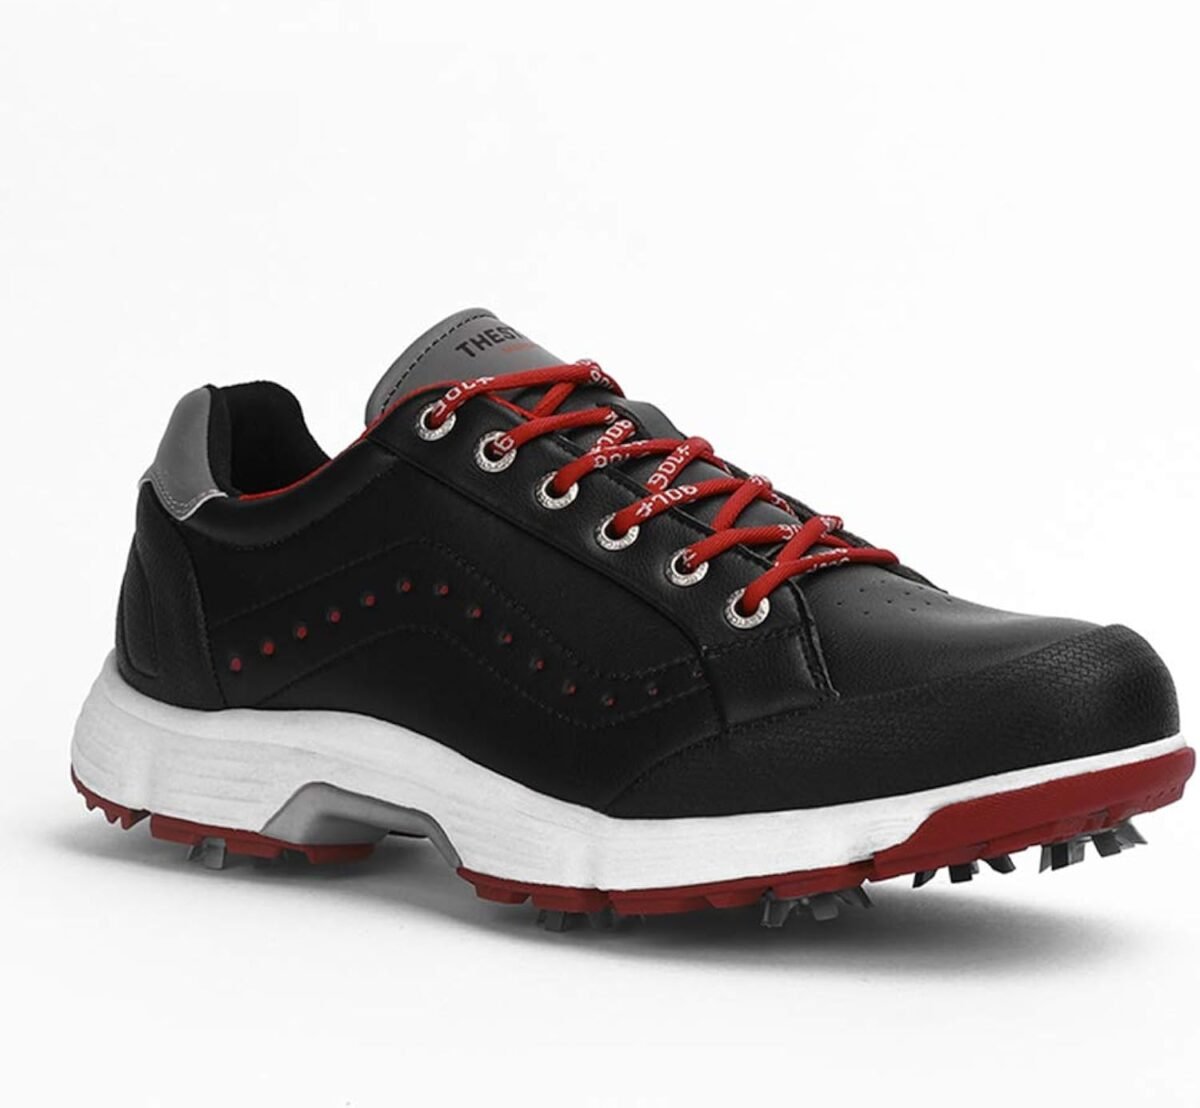 Comparing Top Men’s Golf Shoes: A Review of 5 Waterproof & Lightweight Options